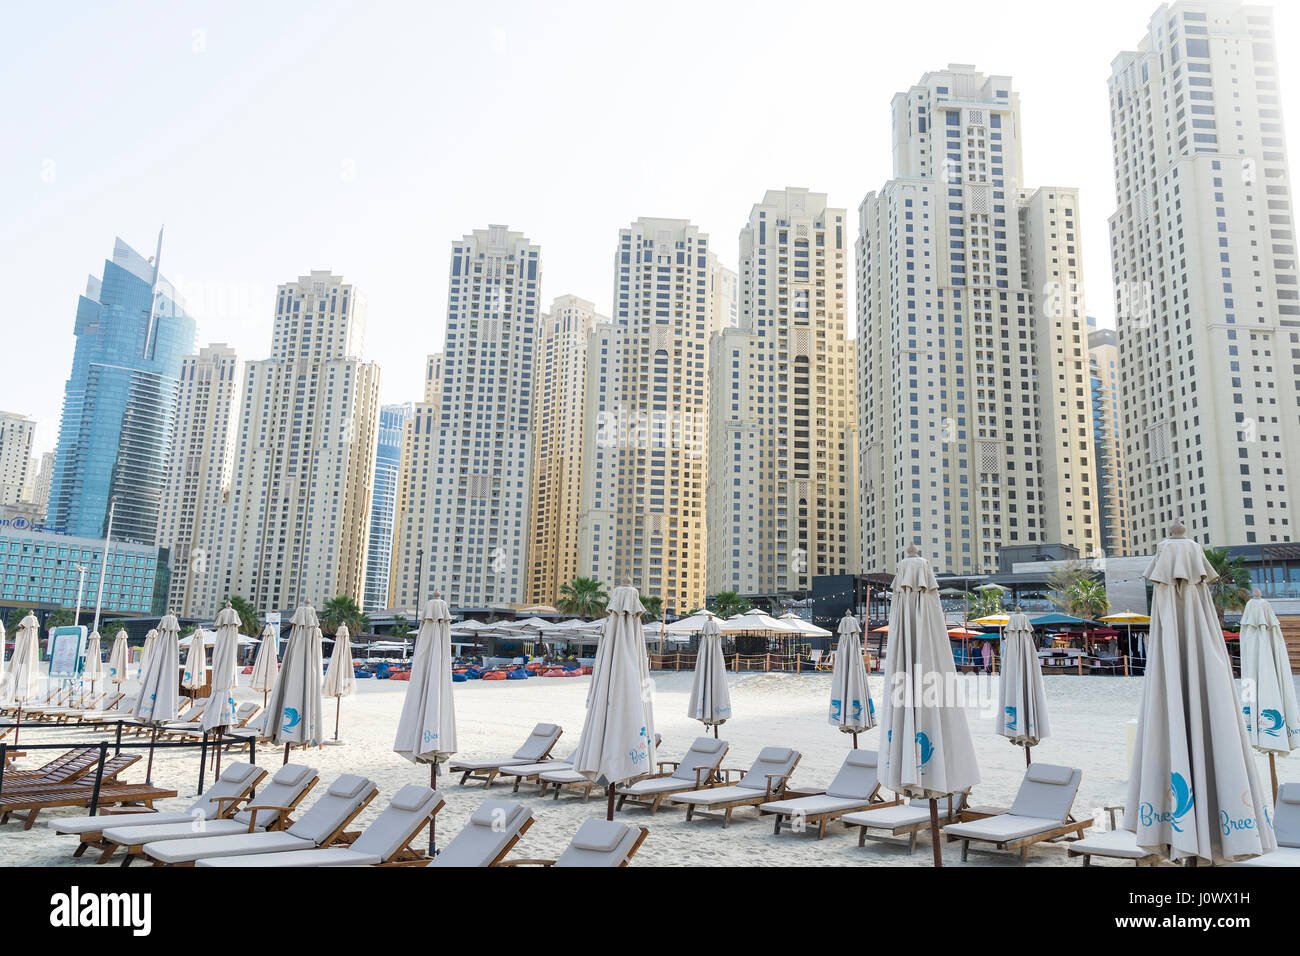 Dubai - January 30: View of Dubai Marina residential skyscrapers and hotels in the morning sun on January 30, 2017. Stock Photo